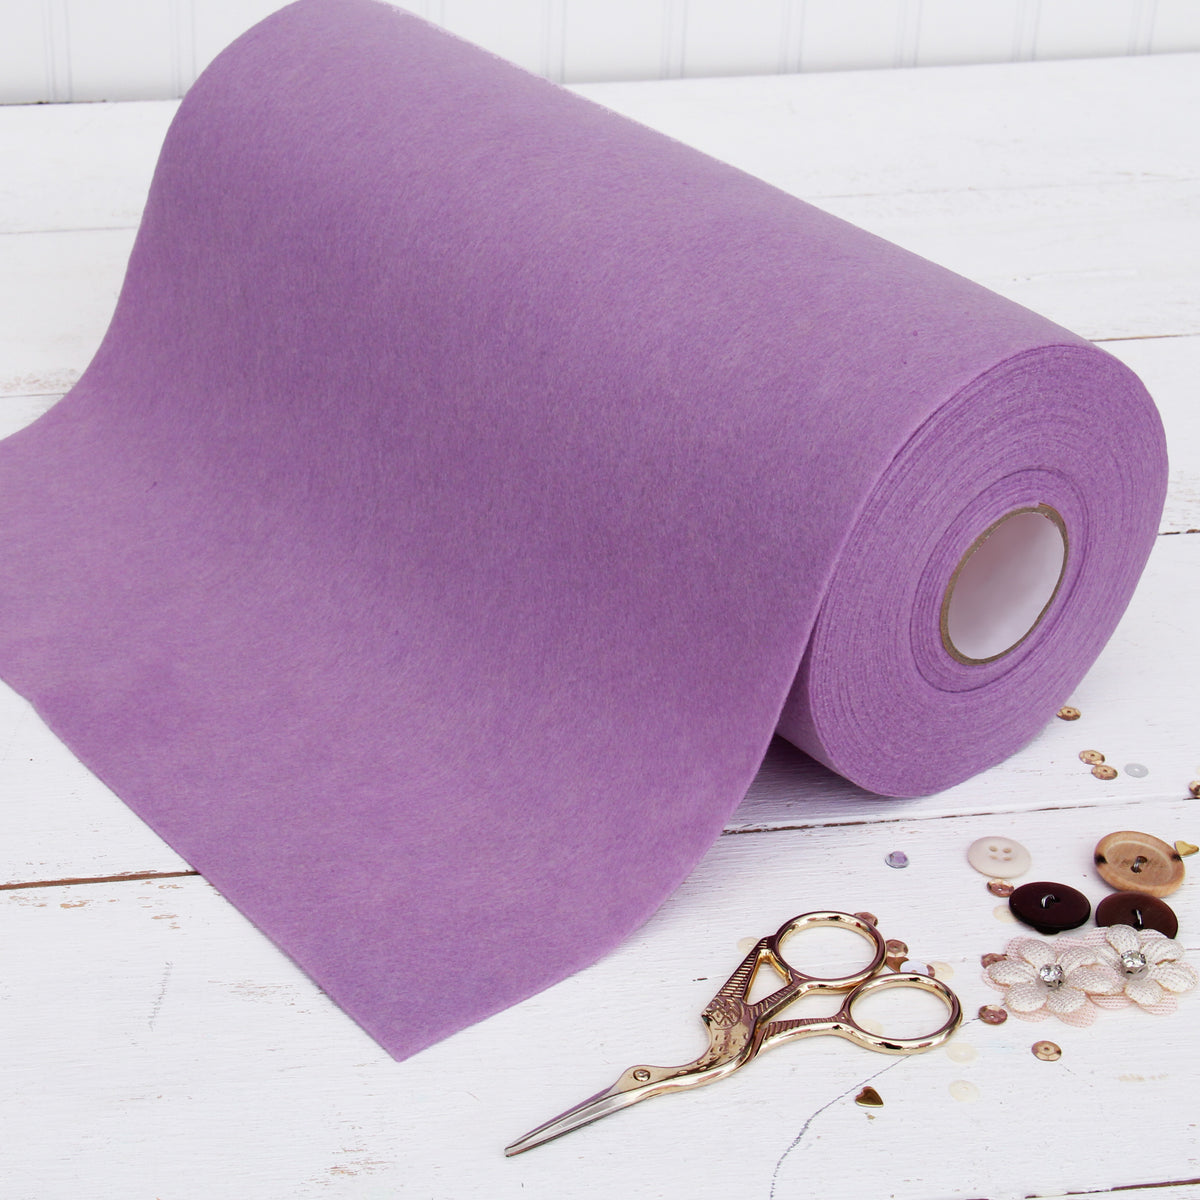 Threadart Premium Felt Roll - 12 inch x 10yd - Lavender | Soft Wool-Like Feel | 1.2mm Thick for DIY Crafts, Sewing, Crafting Projects | Compatible